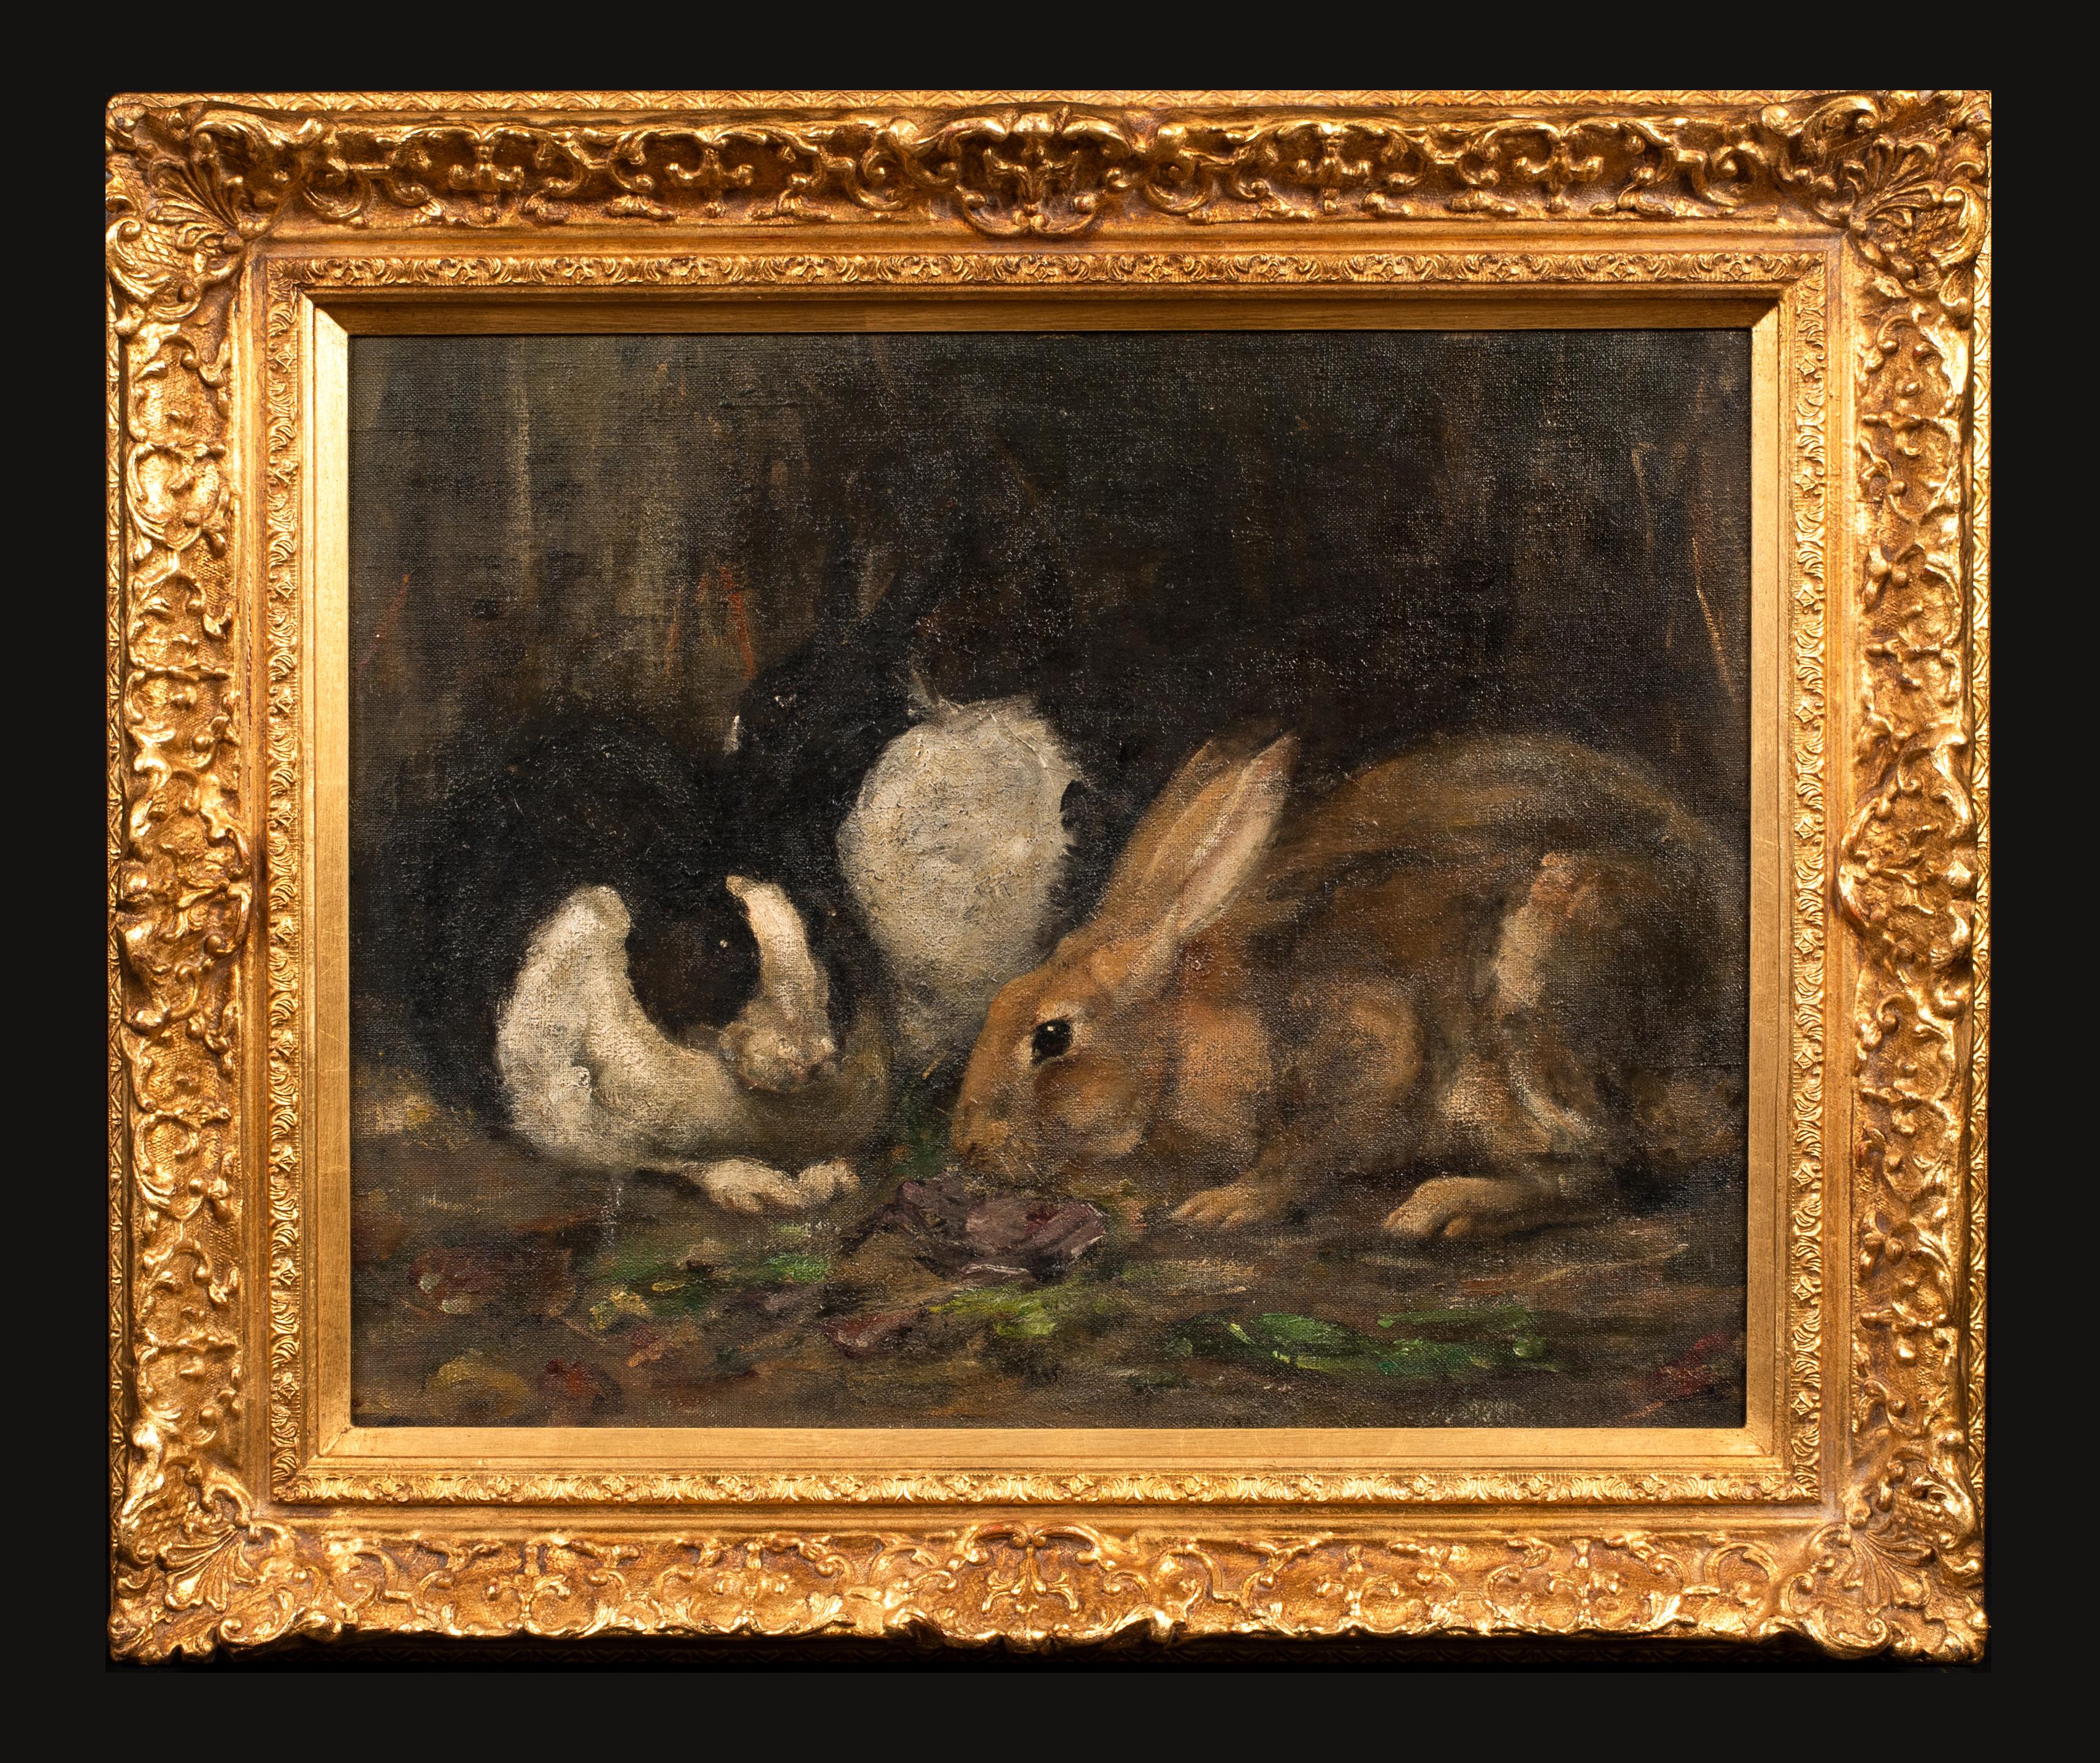 Study Of Rabbits Eating, early 20th century 

English School

Fine Early 20th century English School study of rabbits feeding, oil on board. Good quality and condition study of the three rabbits eating in a corner. Good detail by an accomplished